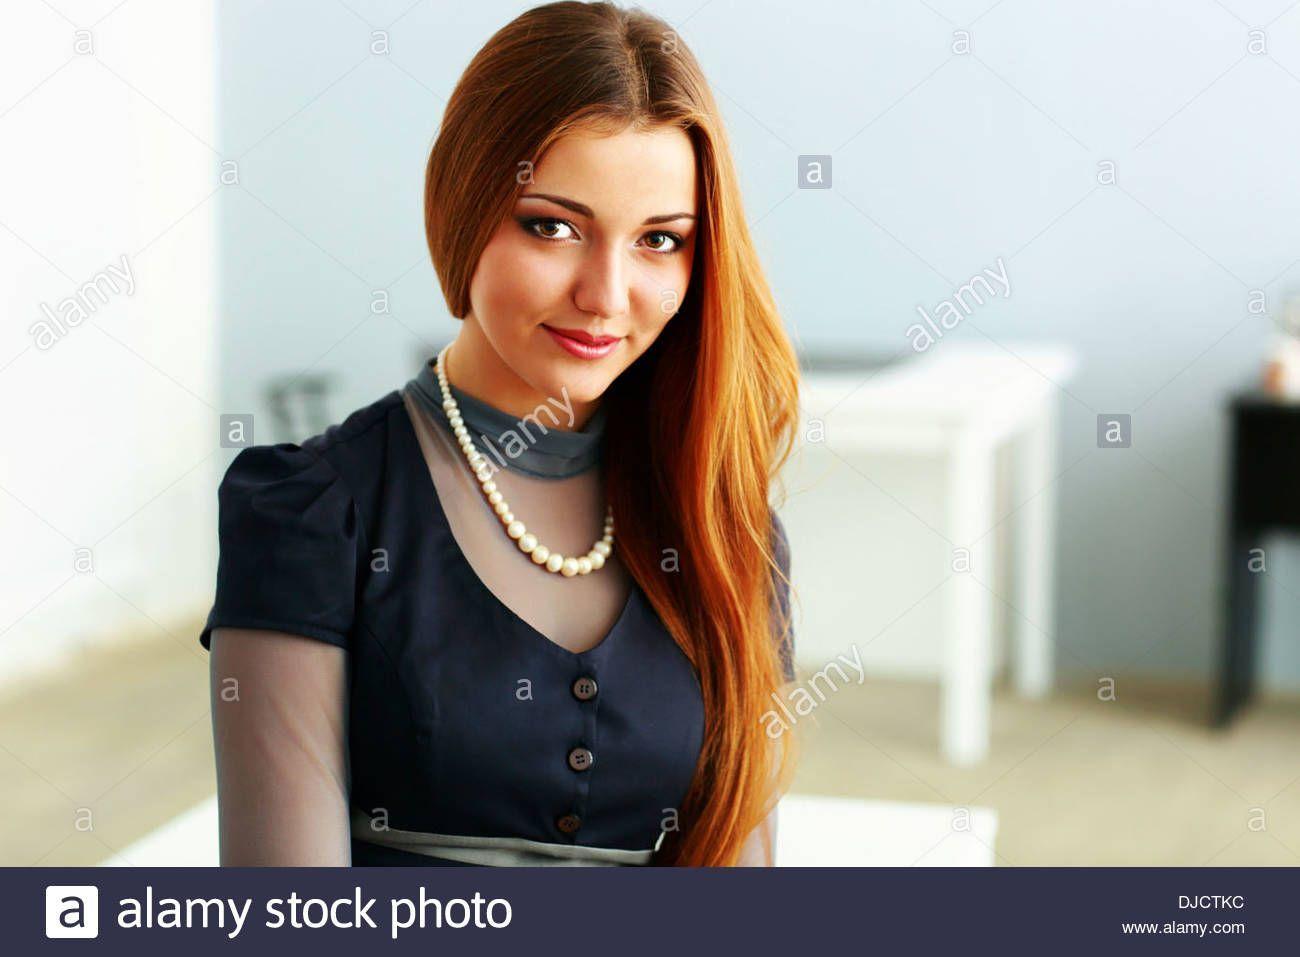 Redhead from the office